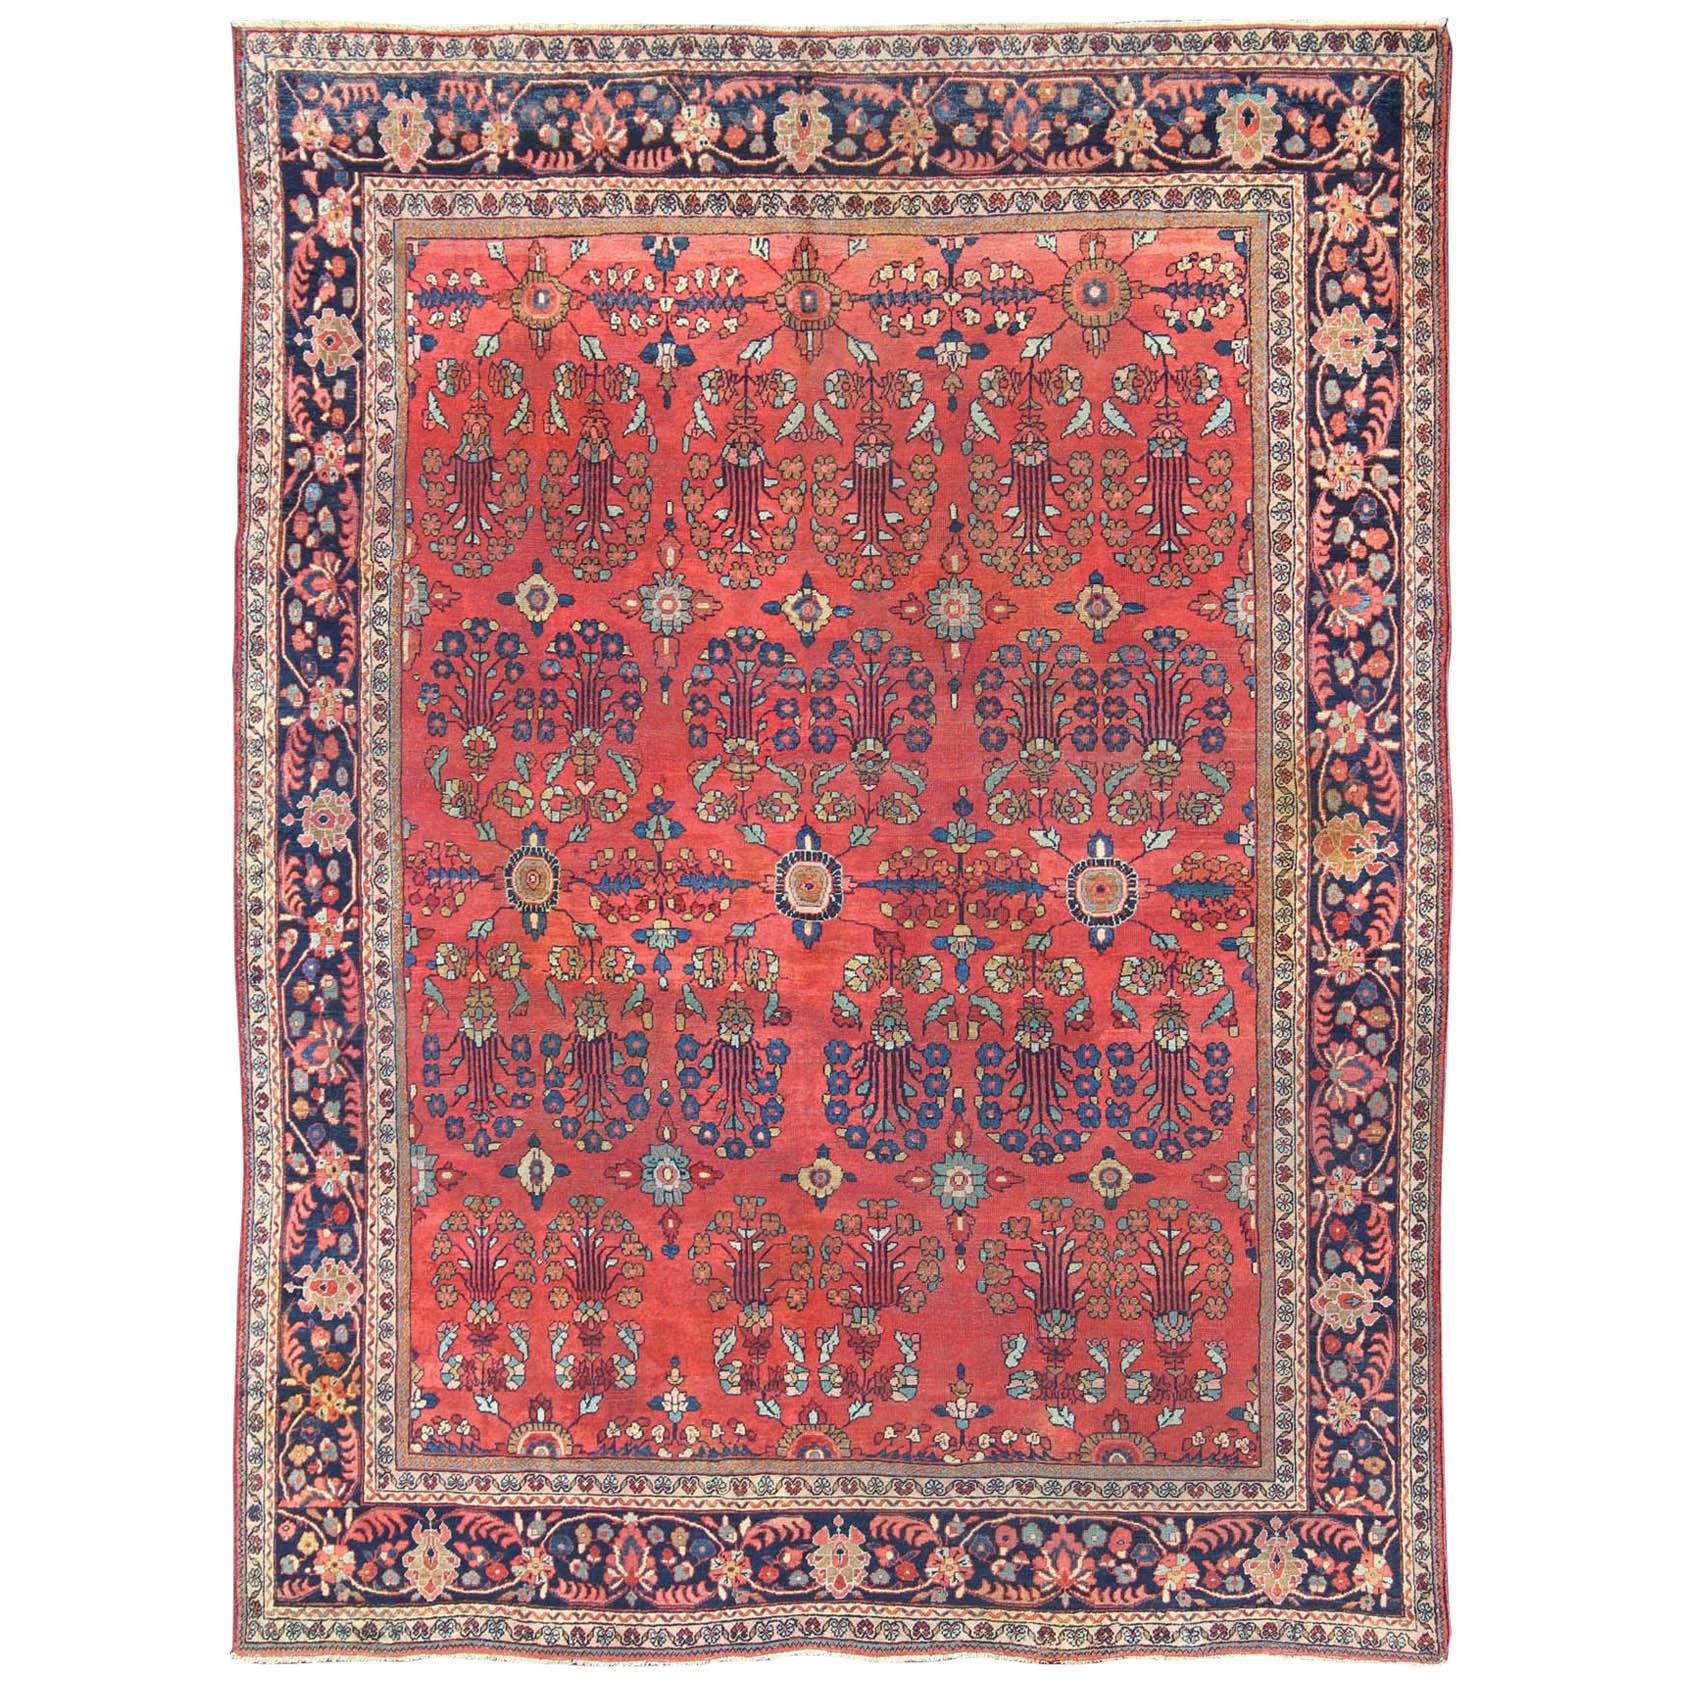 Antique Sultanabad Carpet with All-Over Large Scale Flower Design With Red Field